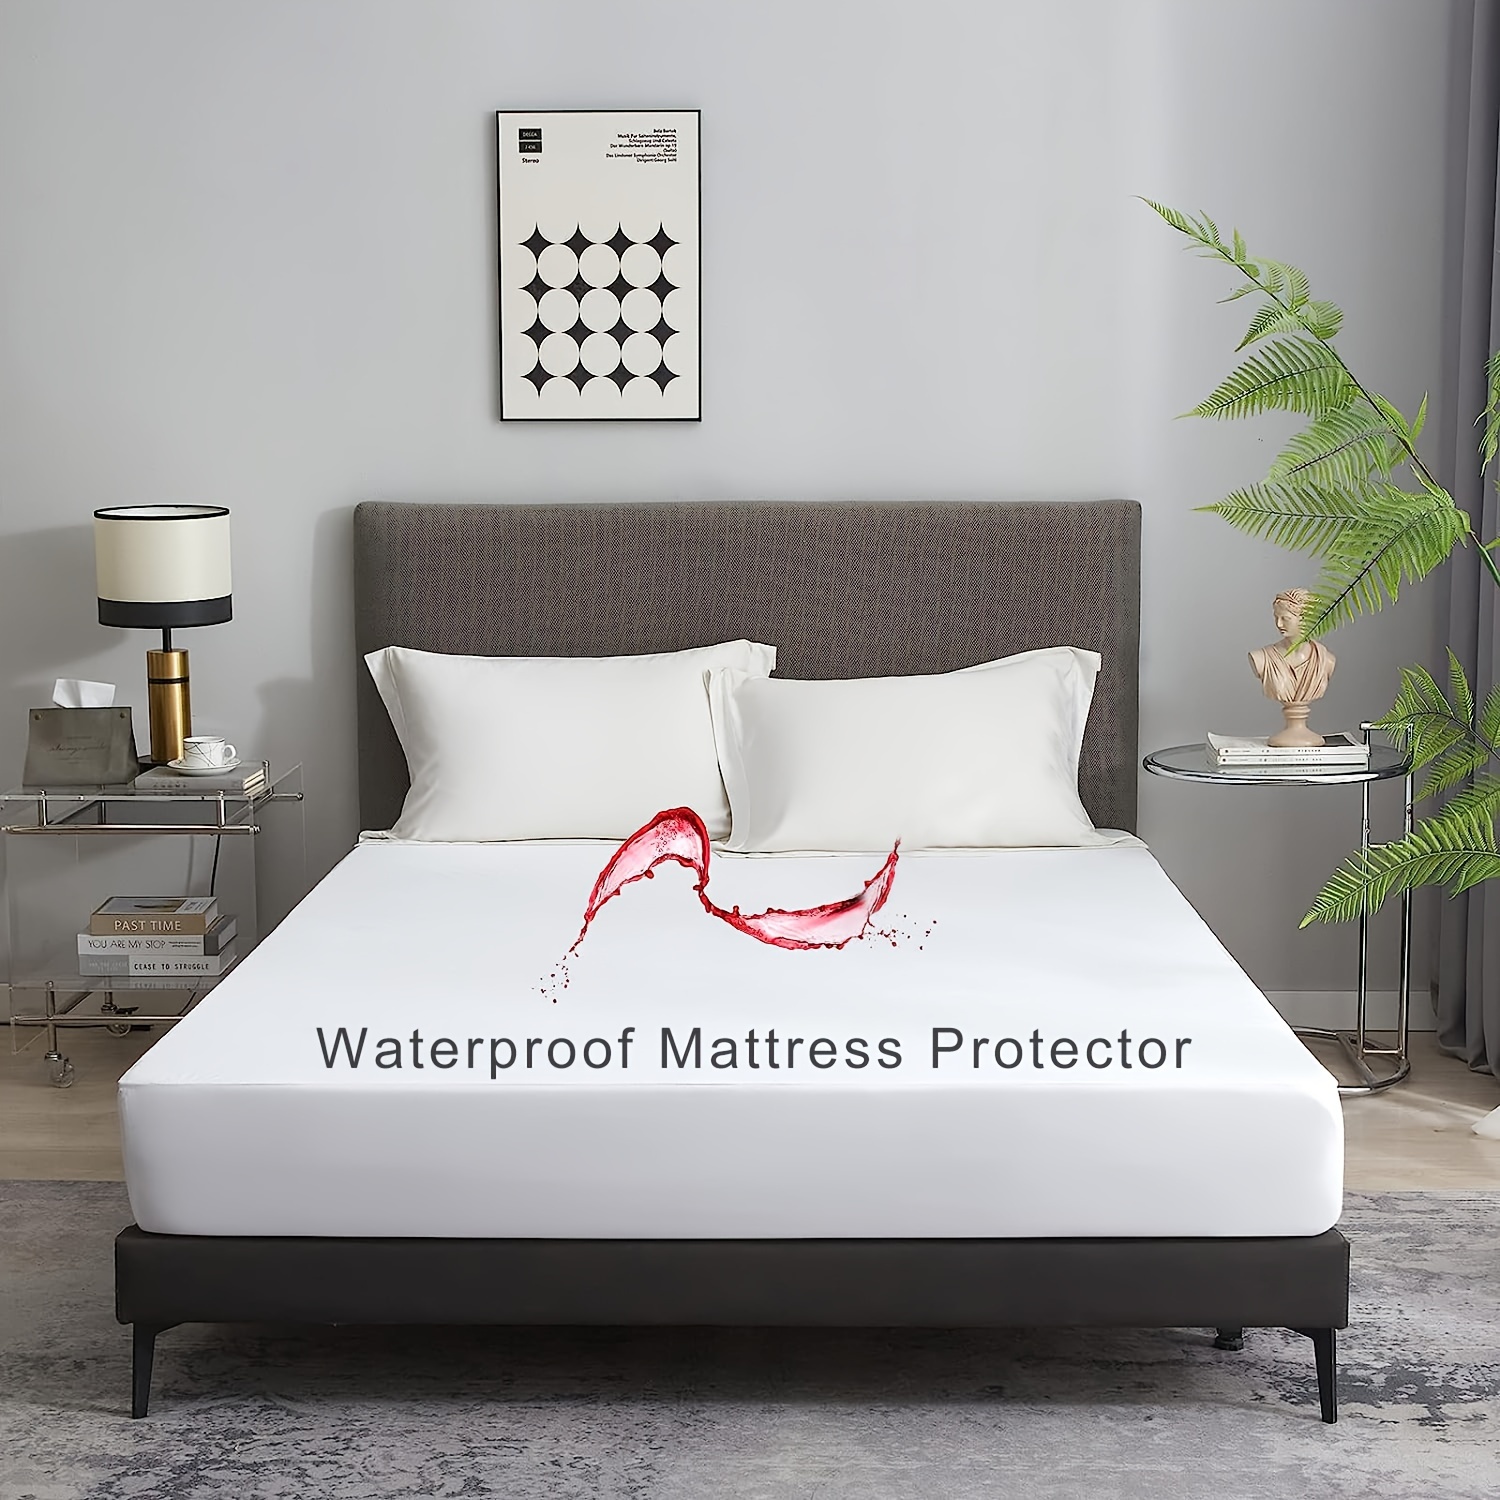 Premium 100% Waterproof King Size Mattress Protector, Cooling Tech Bed Mattress Cover Noiseless Soft Breathable Mattress Pad Protection Fitted Style